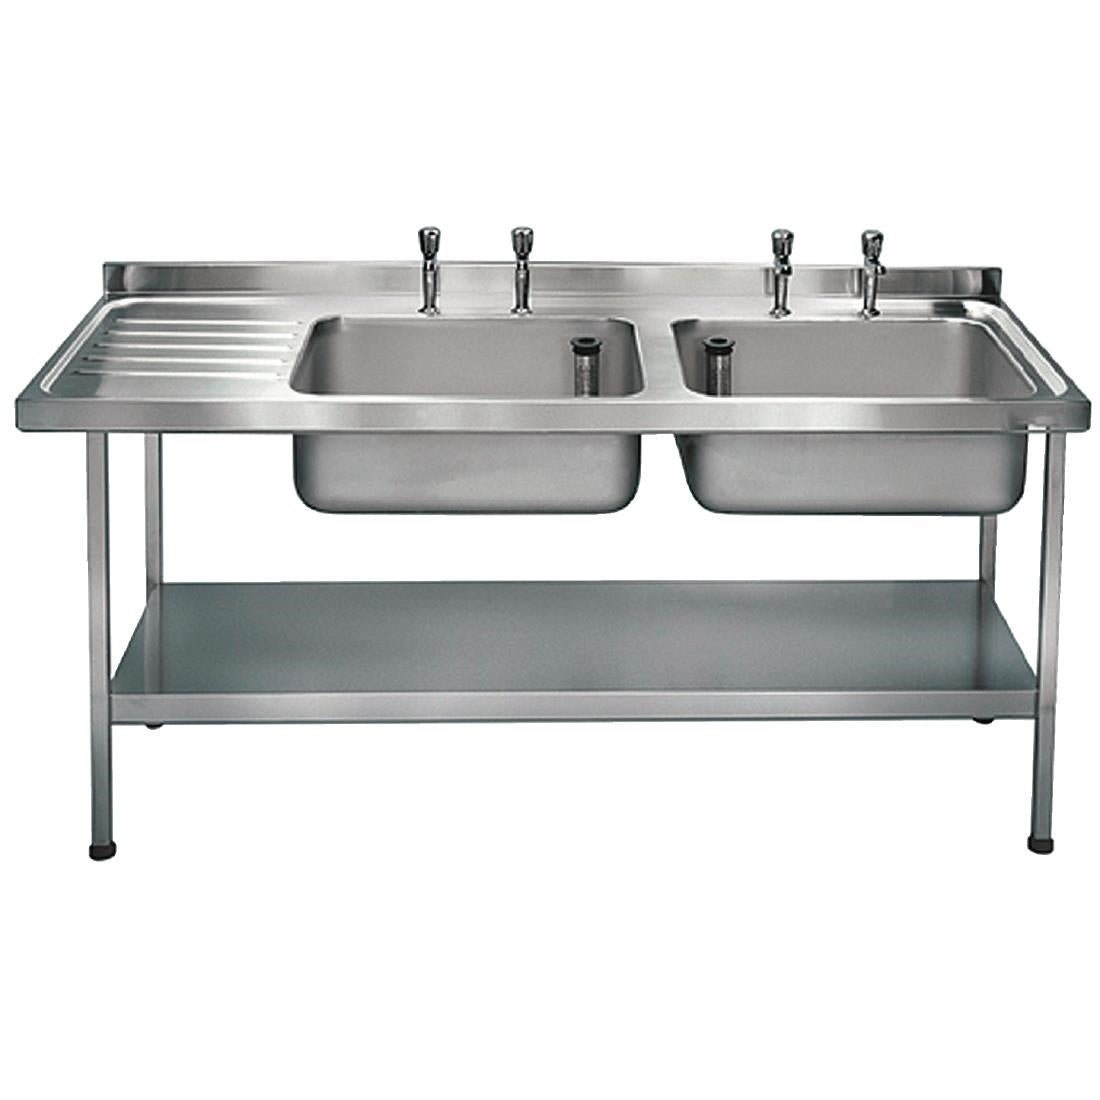 Franke Sissons Self Assembly Stainless Steel Double Sink Left Hand Drainer 1800x650mm JD Catering Equipment Solutions Ltd